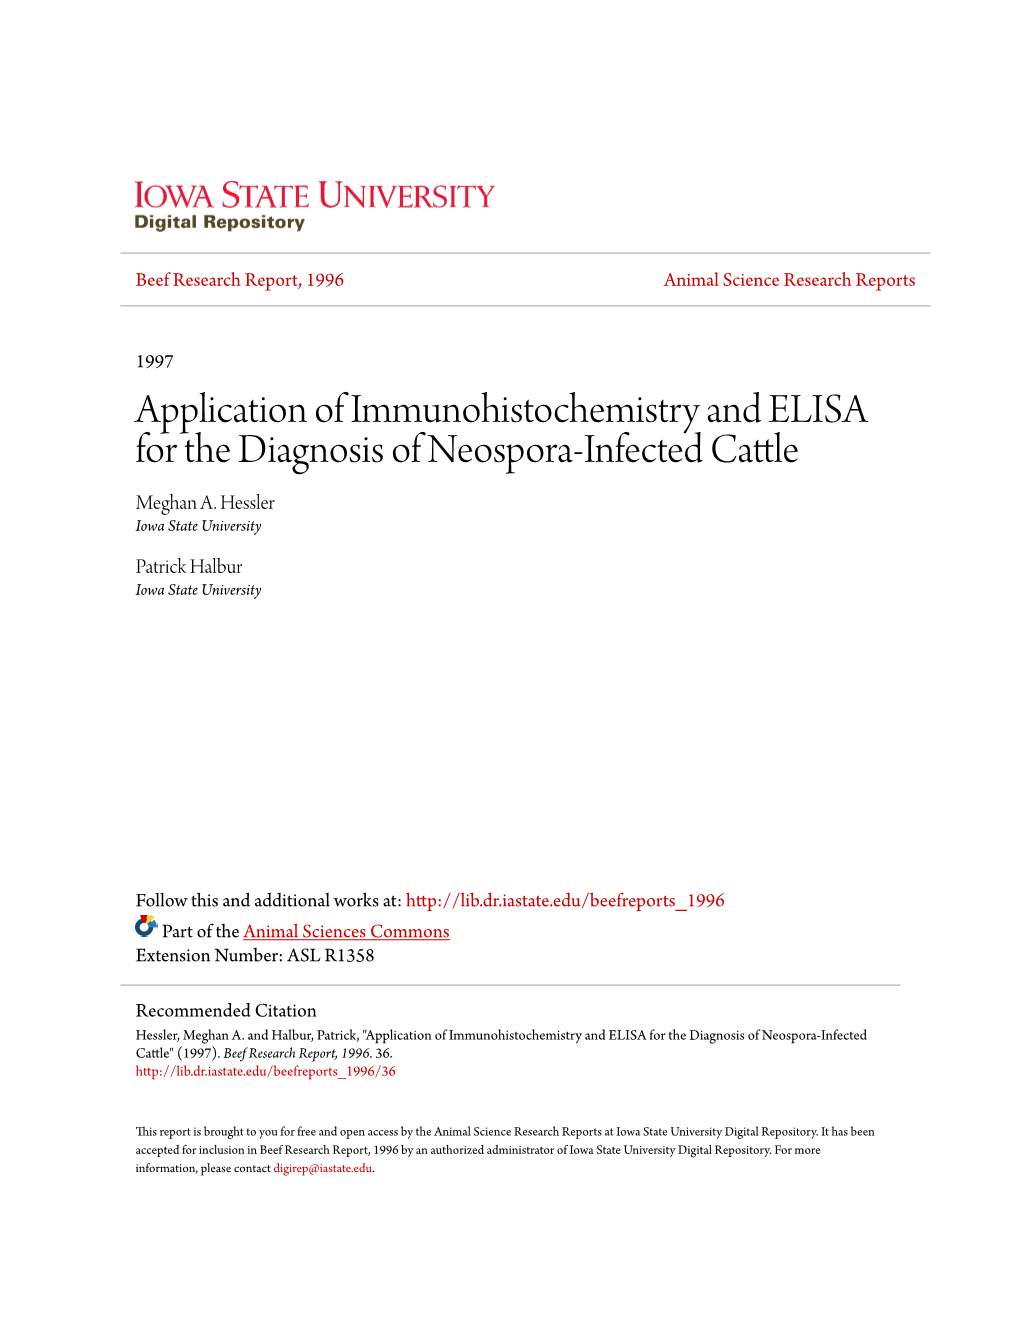 Application of Immunohistochemistry and ELISA for the Diagnosis of Neospora-Infected Cattle Meghan A